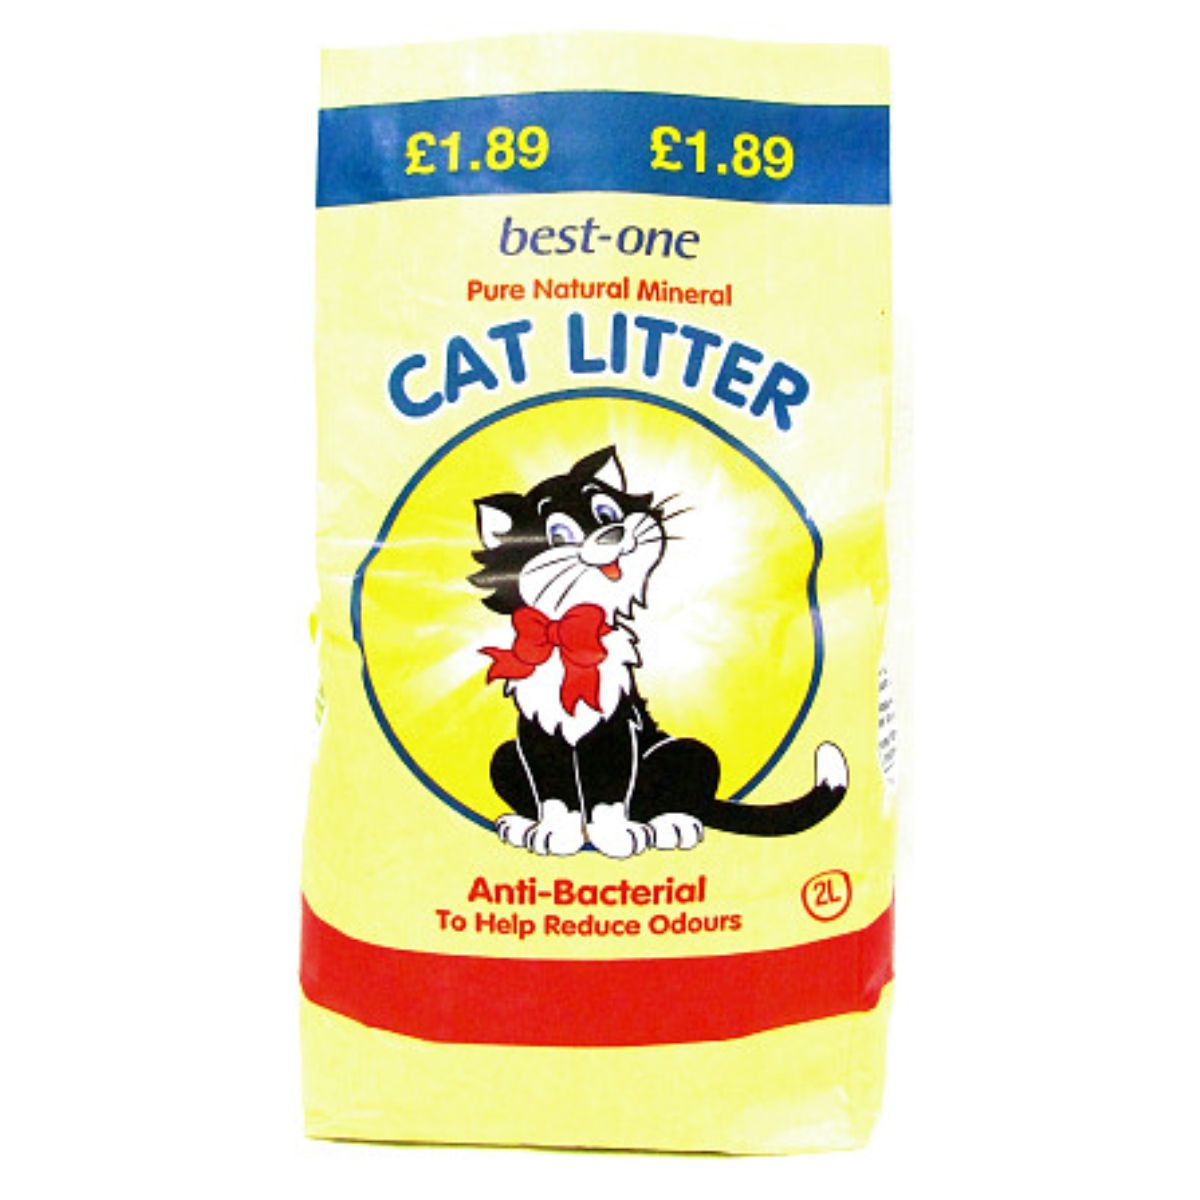 A bag of Best One - Anti Bac Cat Litter - 2L with a cat on it.